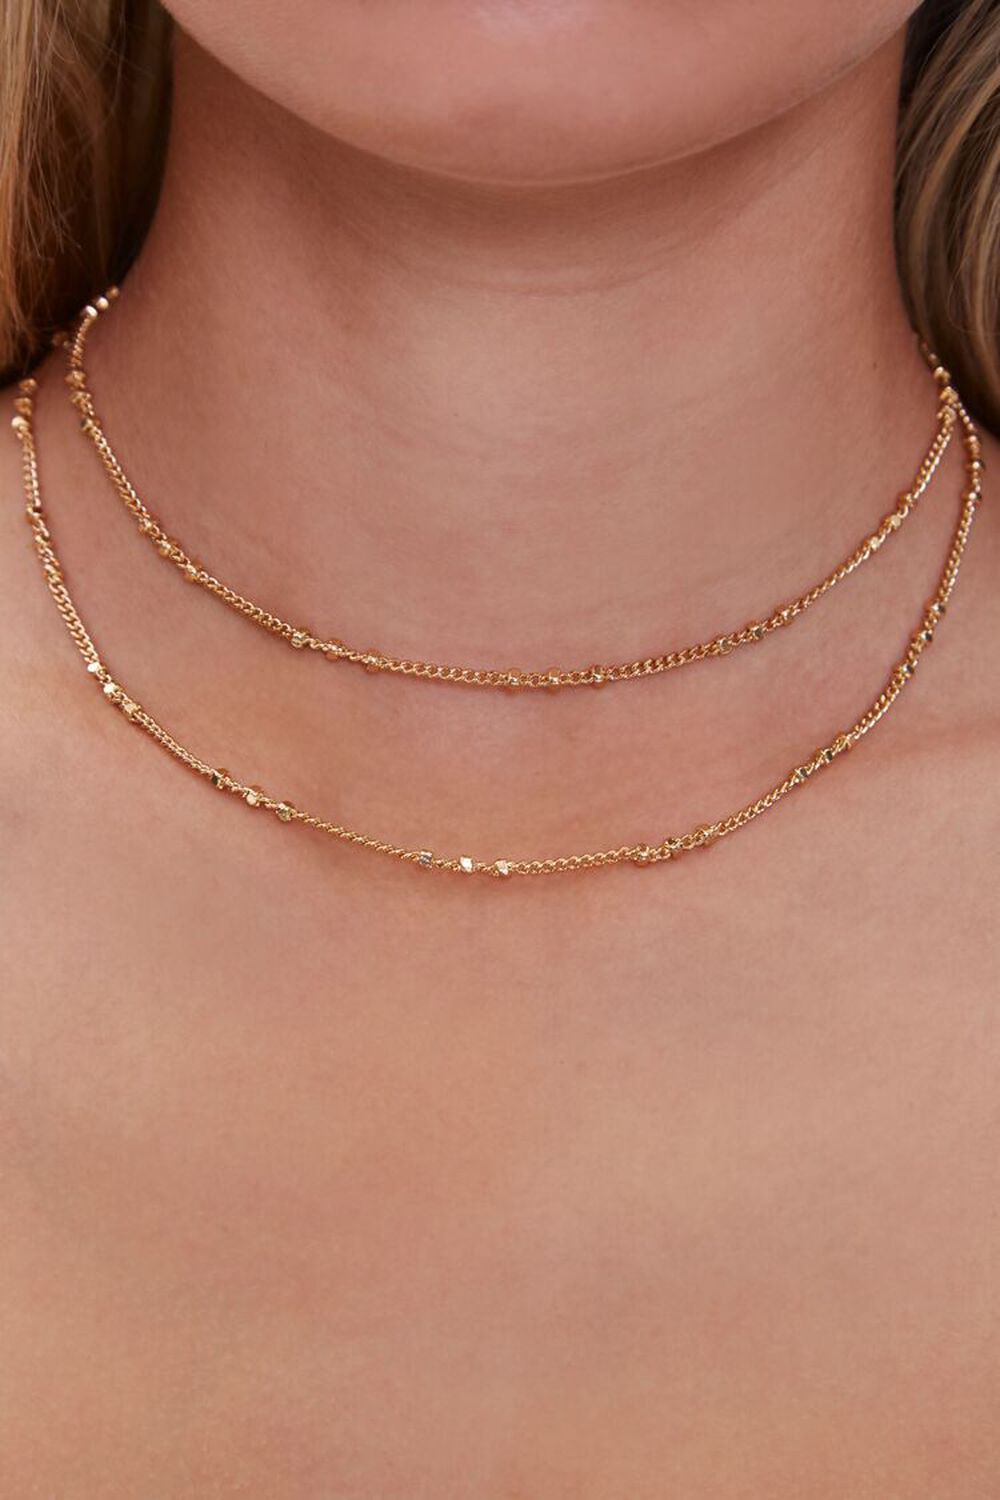 GOLD Beaded Layered Chain Necklace, image 1